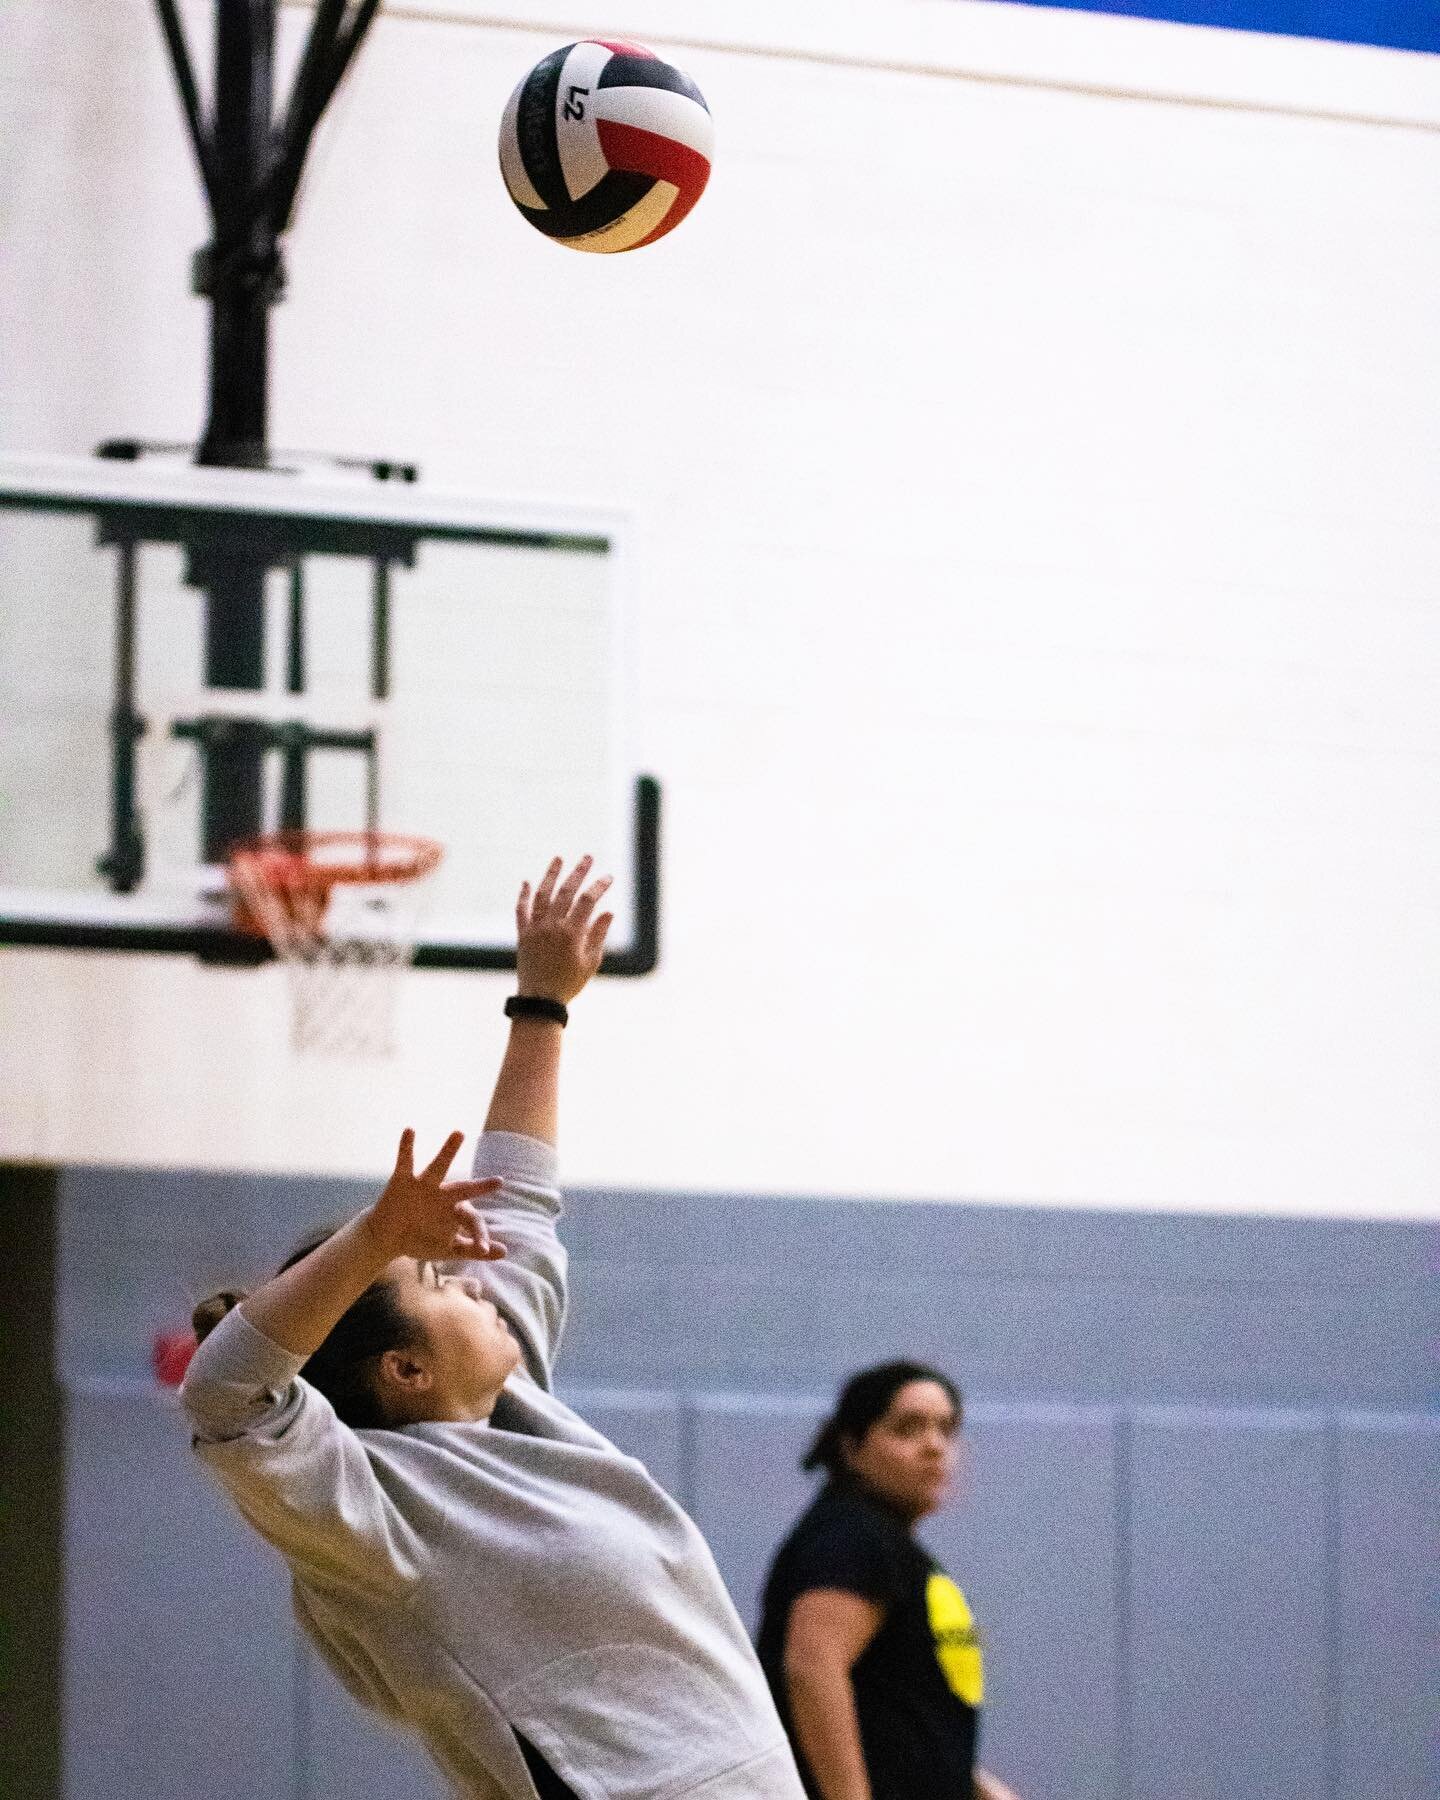 New WSC league photos shot by Tatum Baillie ( @stateoftate )! Links to all photos are in our stories. 
✨If you&rsquo;d like to use any of the photos please tag: @womenssportschi &amp; @stateoftate